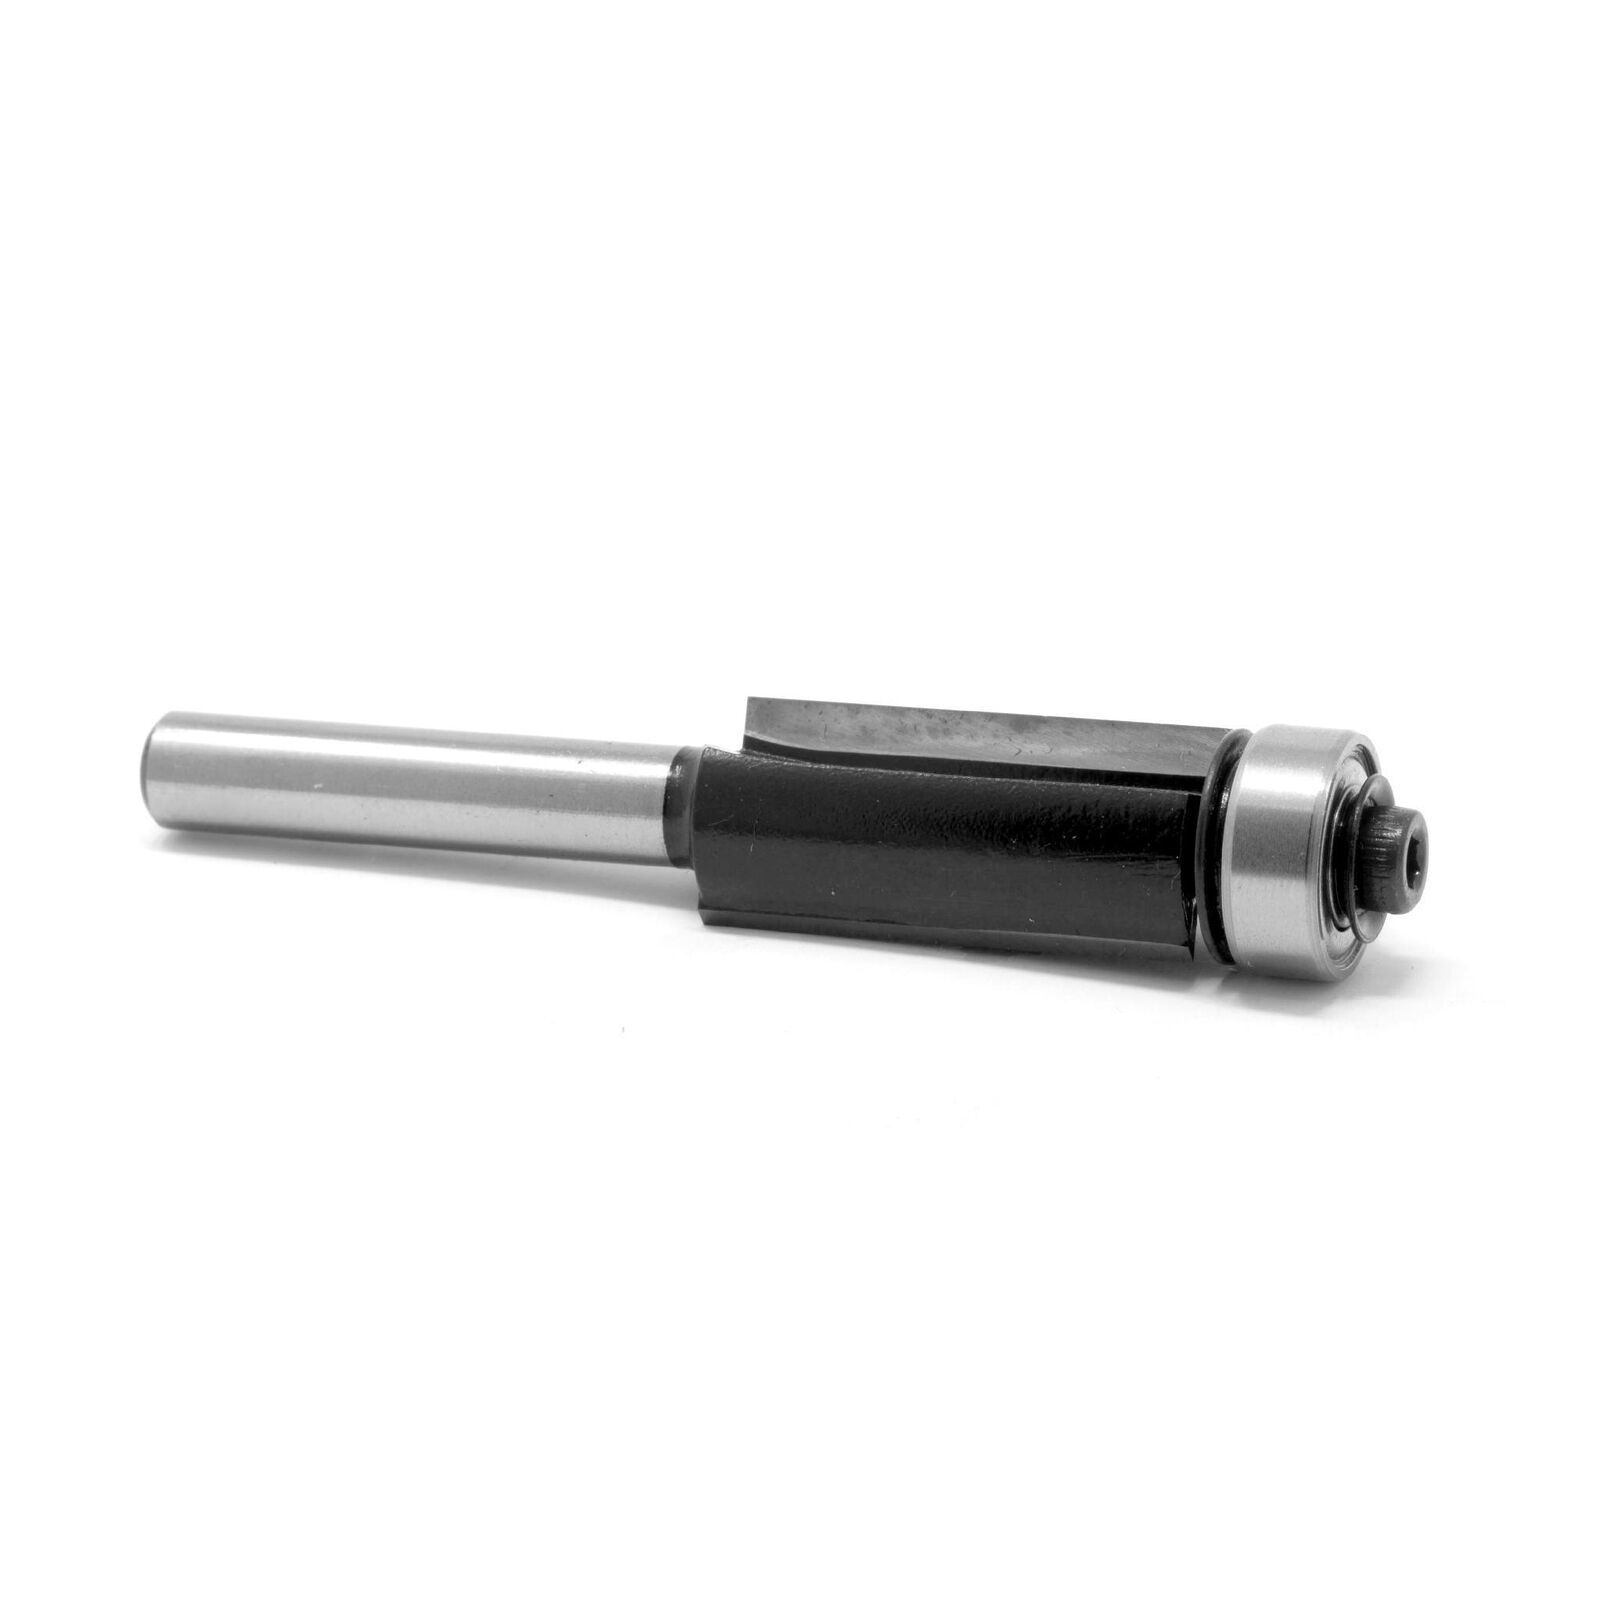 Primary image for WEN RB404FT 1/2 in. Flush Trim Router Bit, 1/4 in. Shank and 1 in. Length